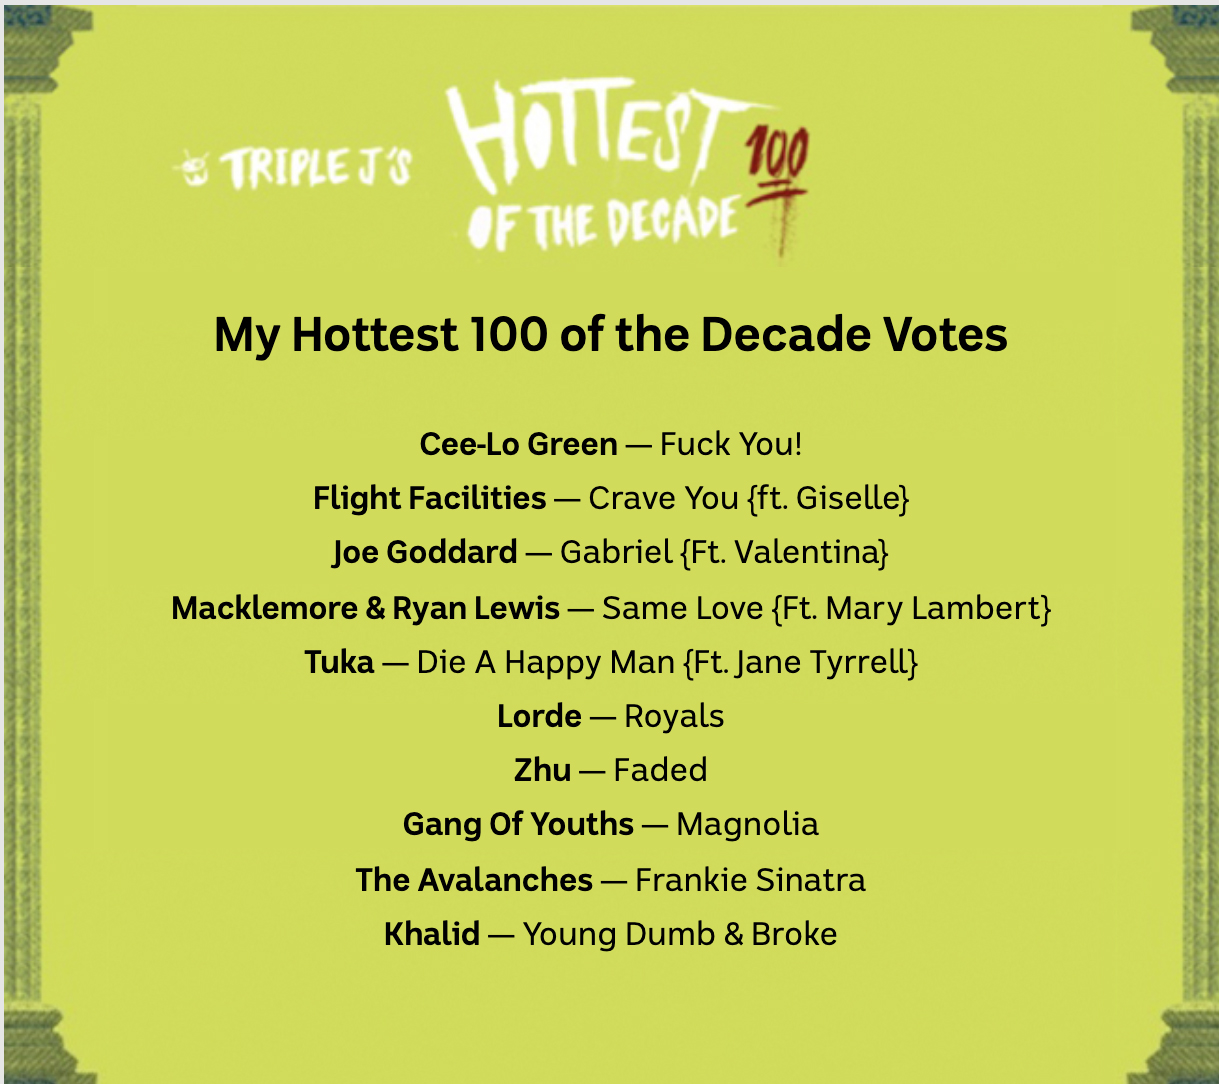 hottest 100 of the decade votes